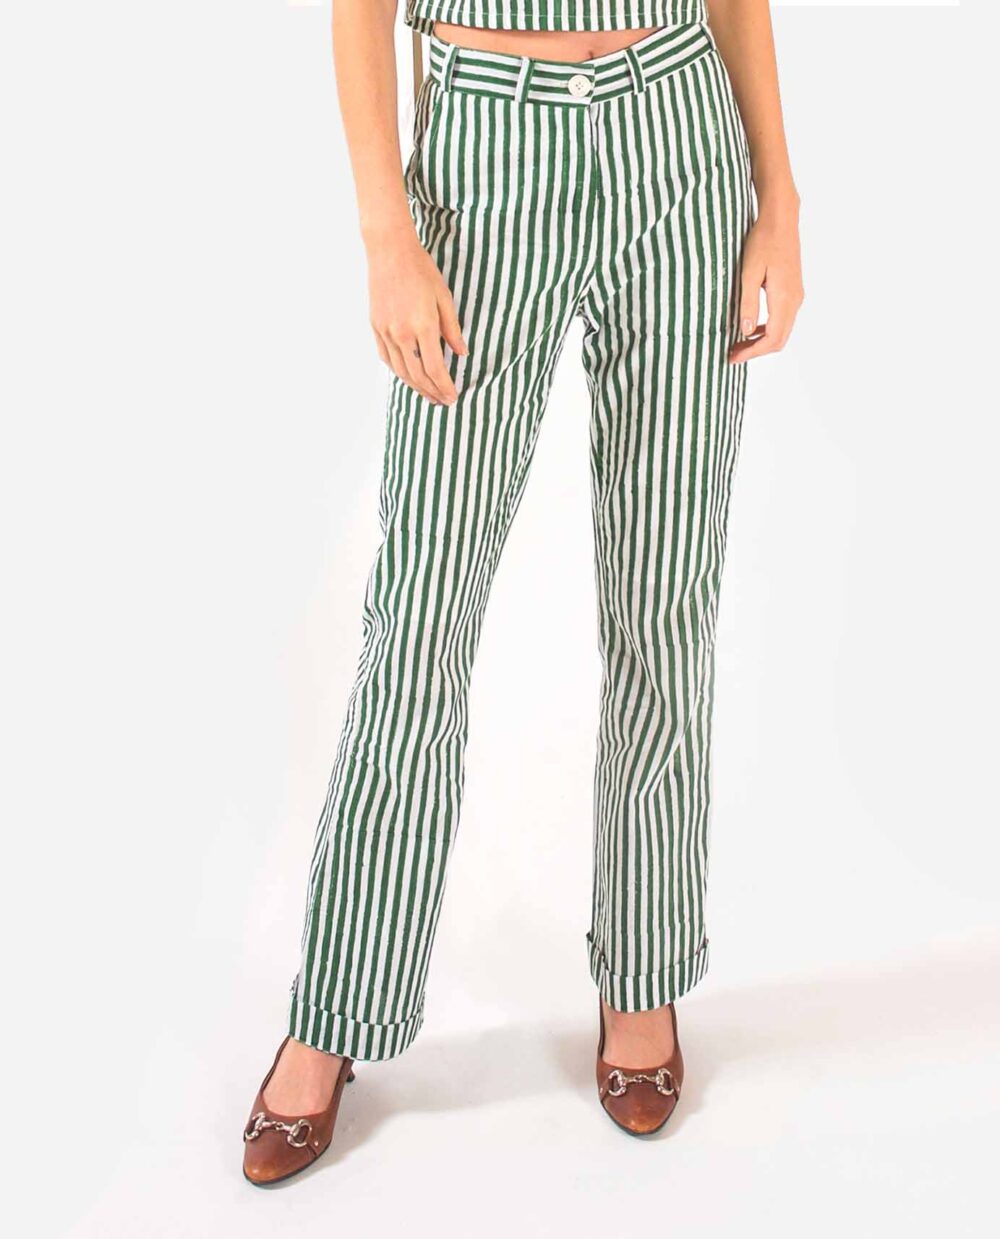 Womens Stripe Trousers Sustainable Clothing Organic Cotton